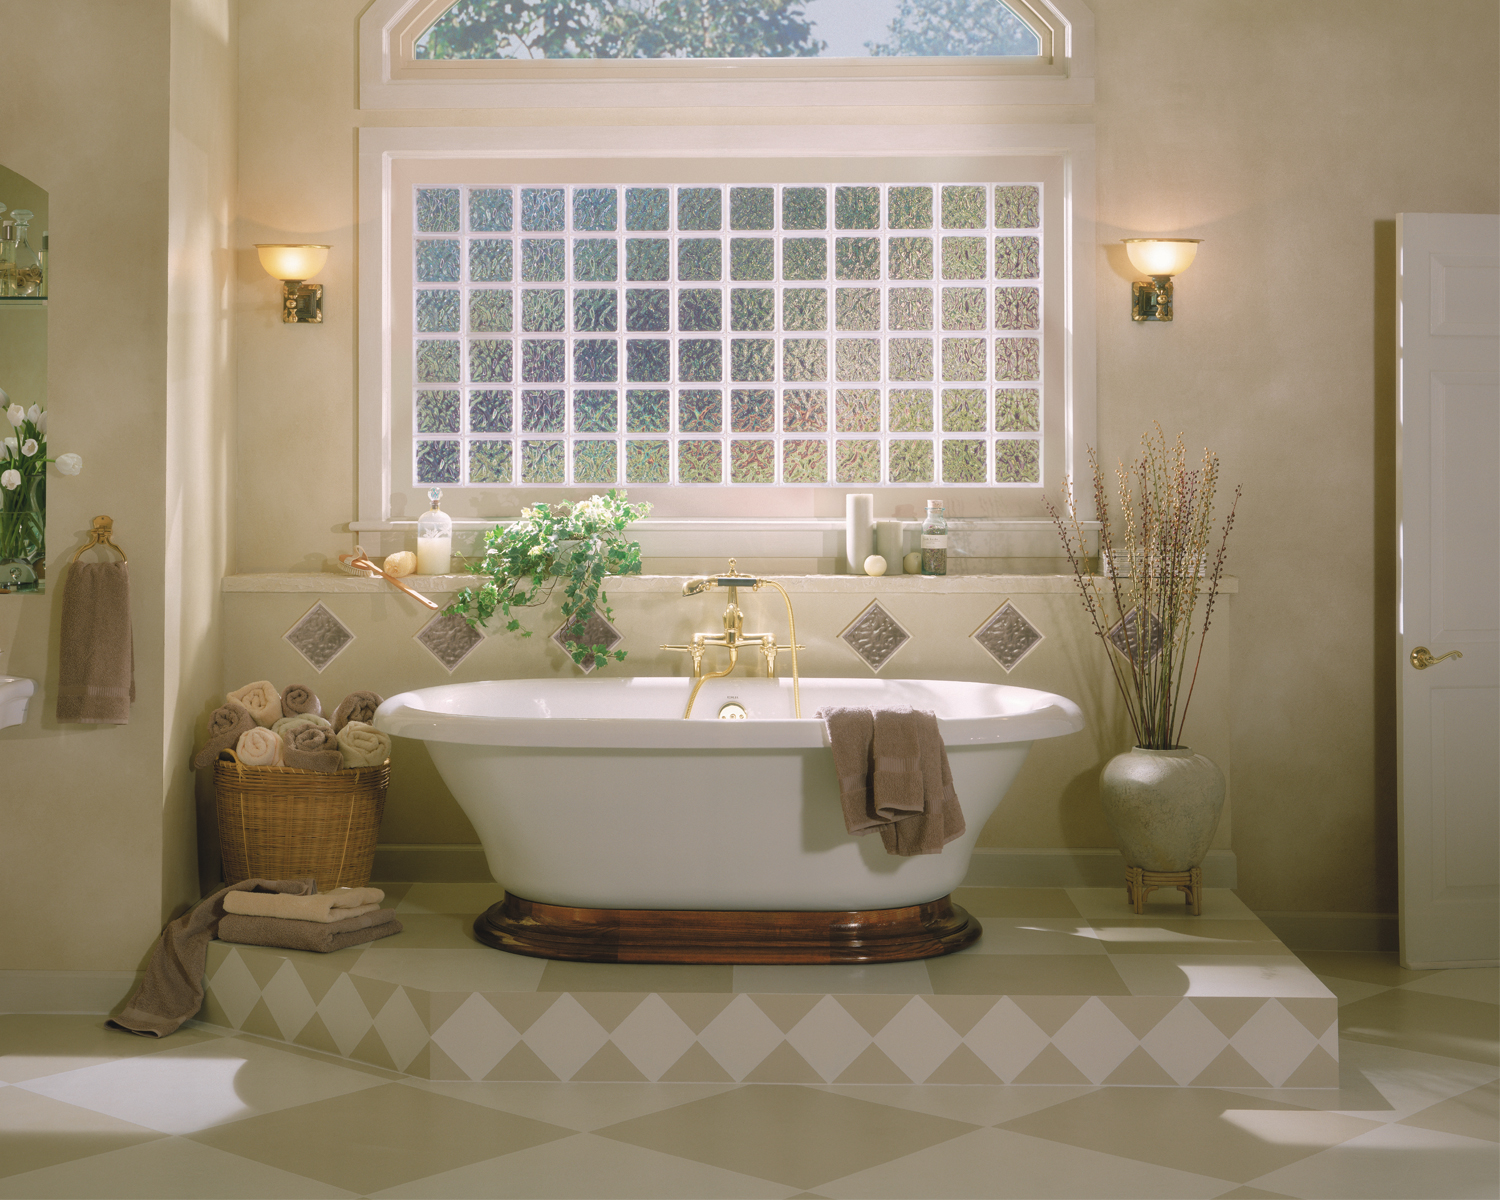 Hy-Lite Acrylic and Glass Block Picture Window above bathtub